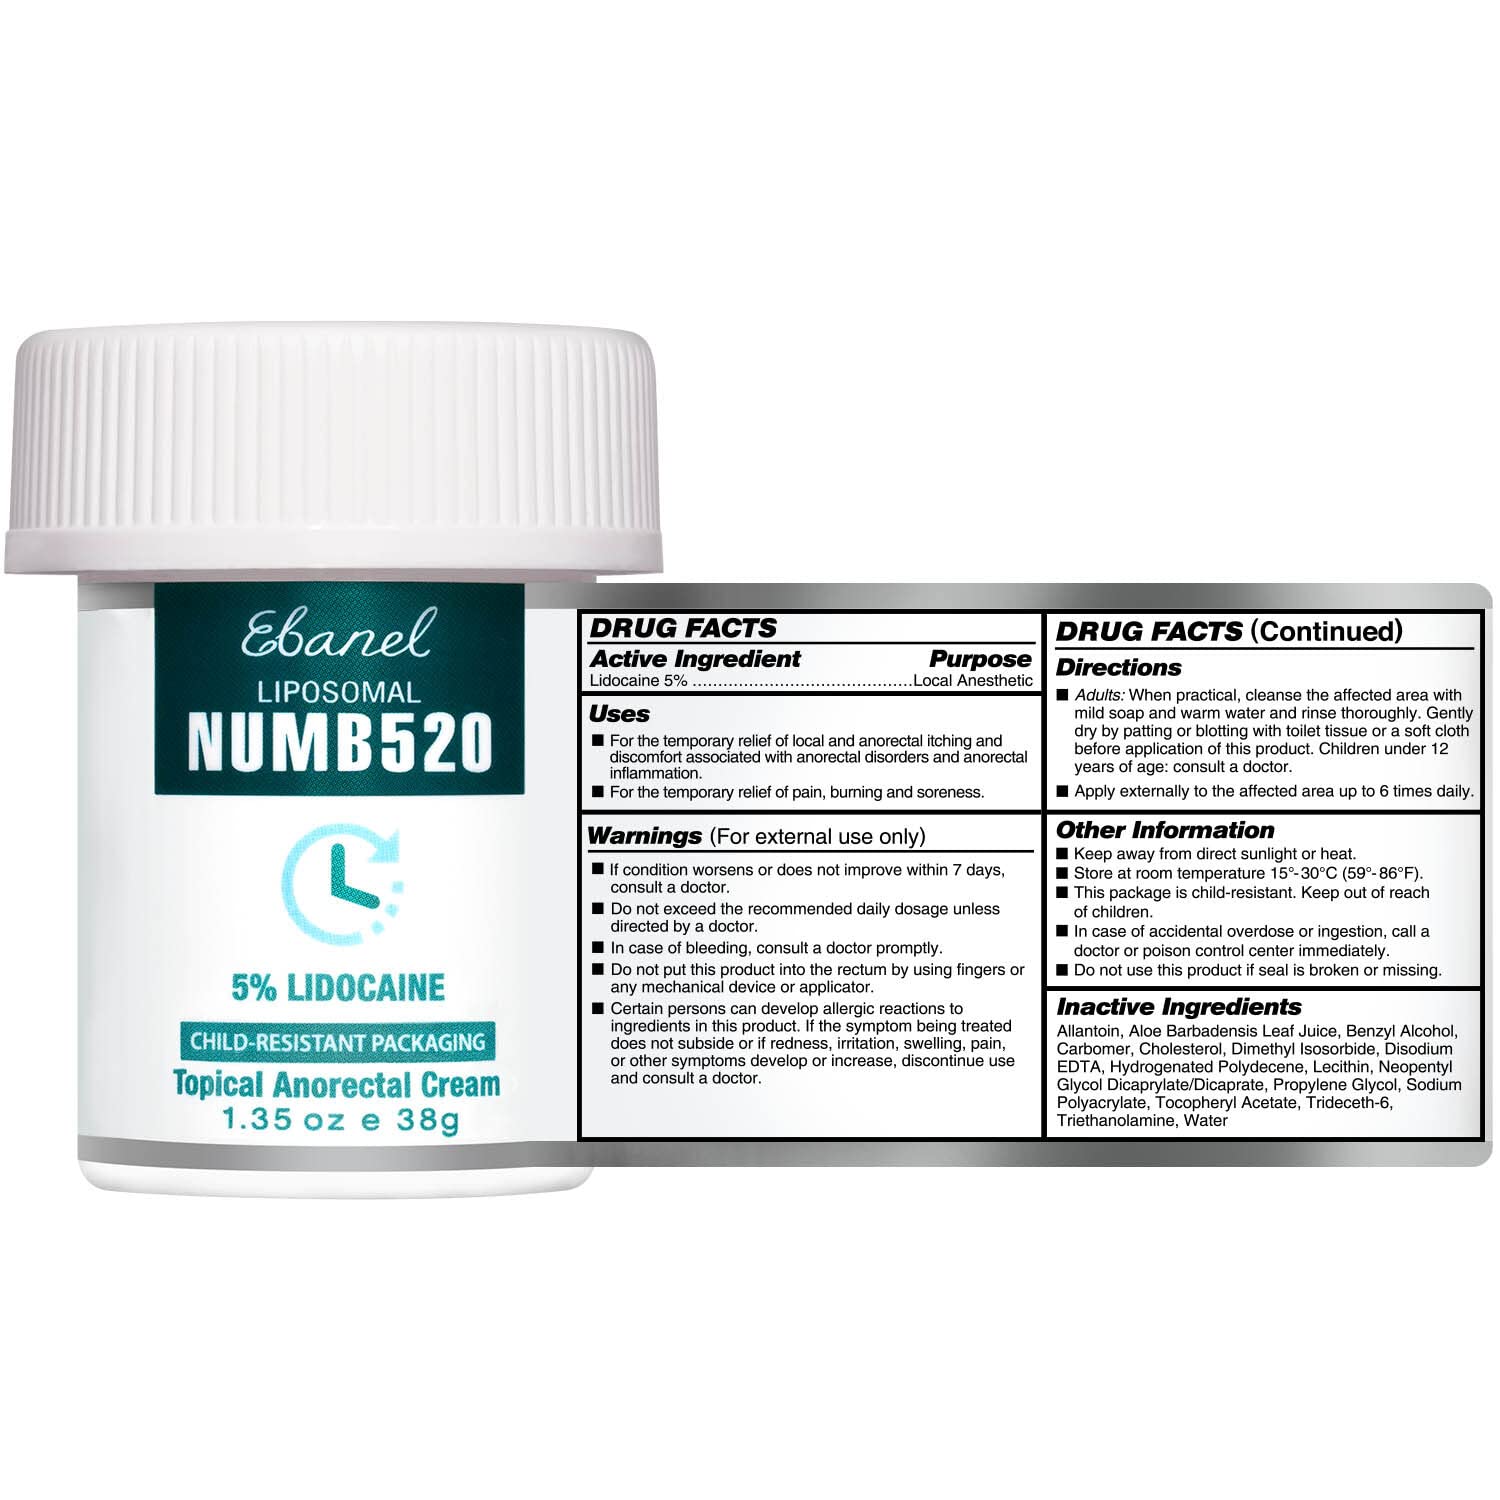 Ebanel 5% Lidocaine Numbing Cream Maximum Strength, Liposomal Numb520 Topical Anesthetic Pain Relief Cream 1.35Oz, Infused with Aloe Vera, Vitamin E for Local and Anorectal Uses, Hemorrhoid Treatment